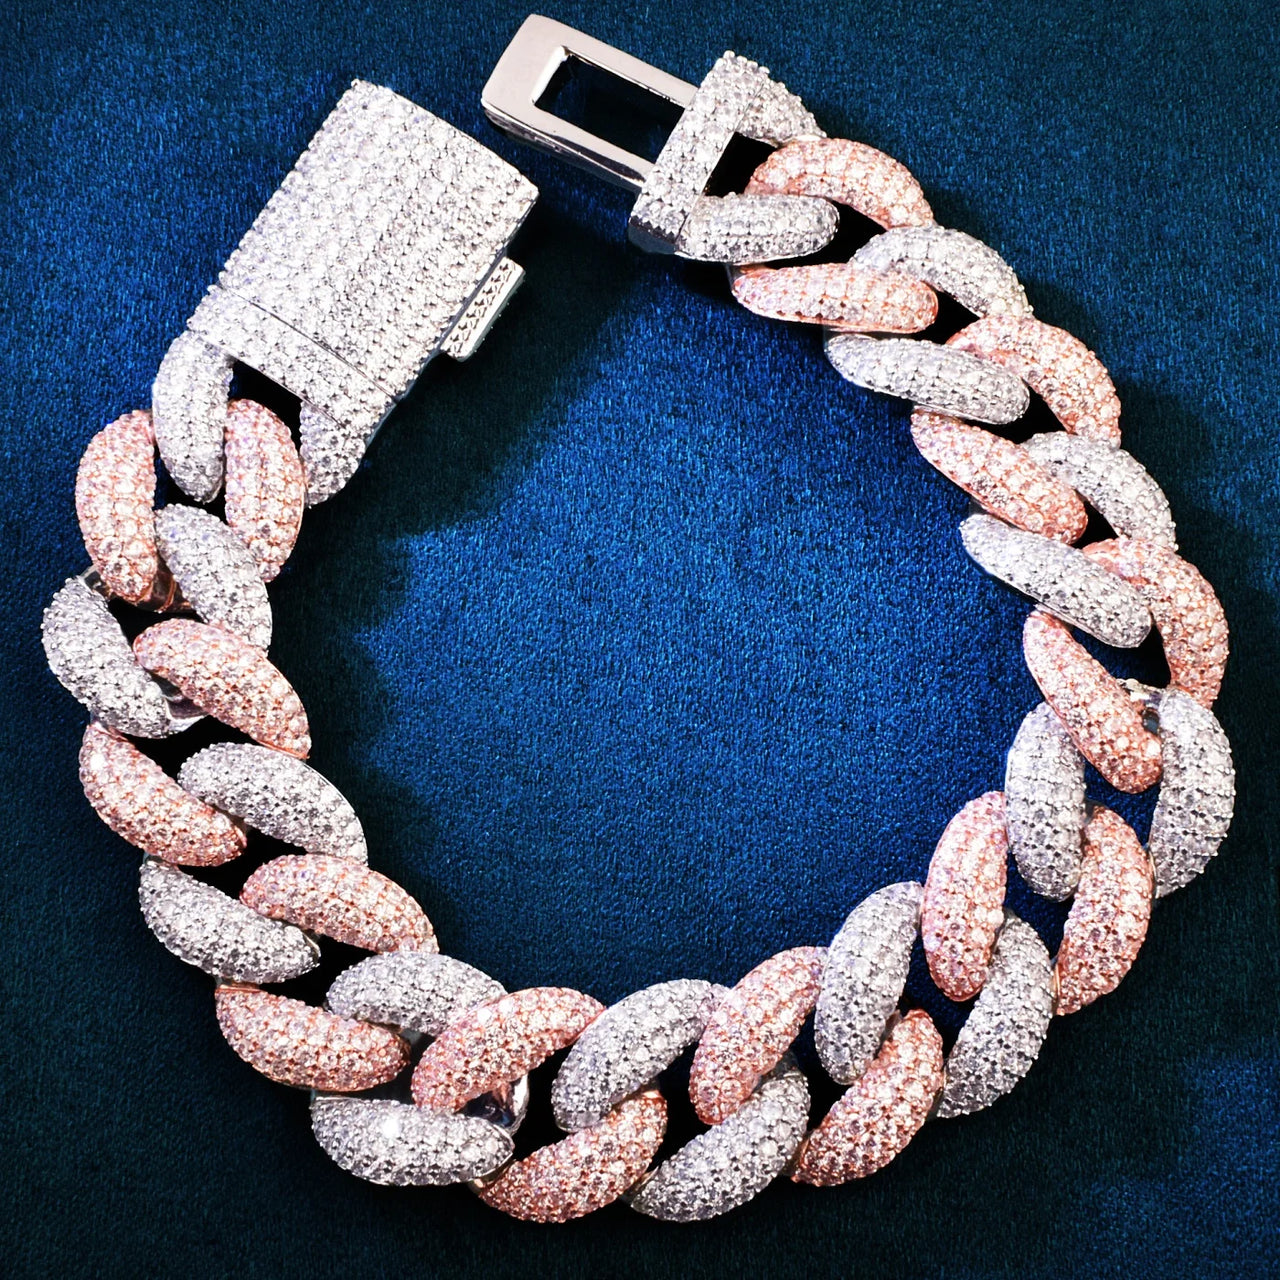 19mm Iced Two Tone Miami Cuban Link Bracelet - Different Drips